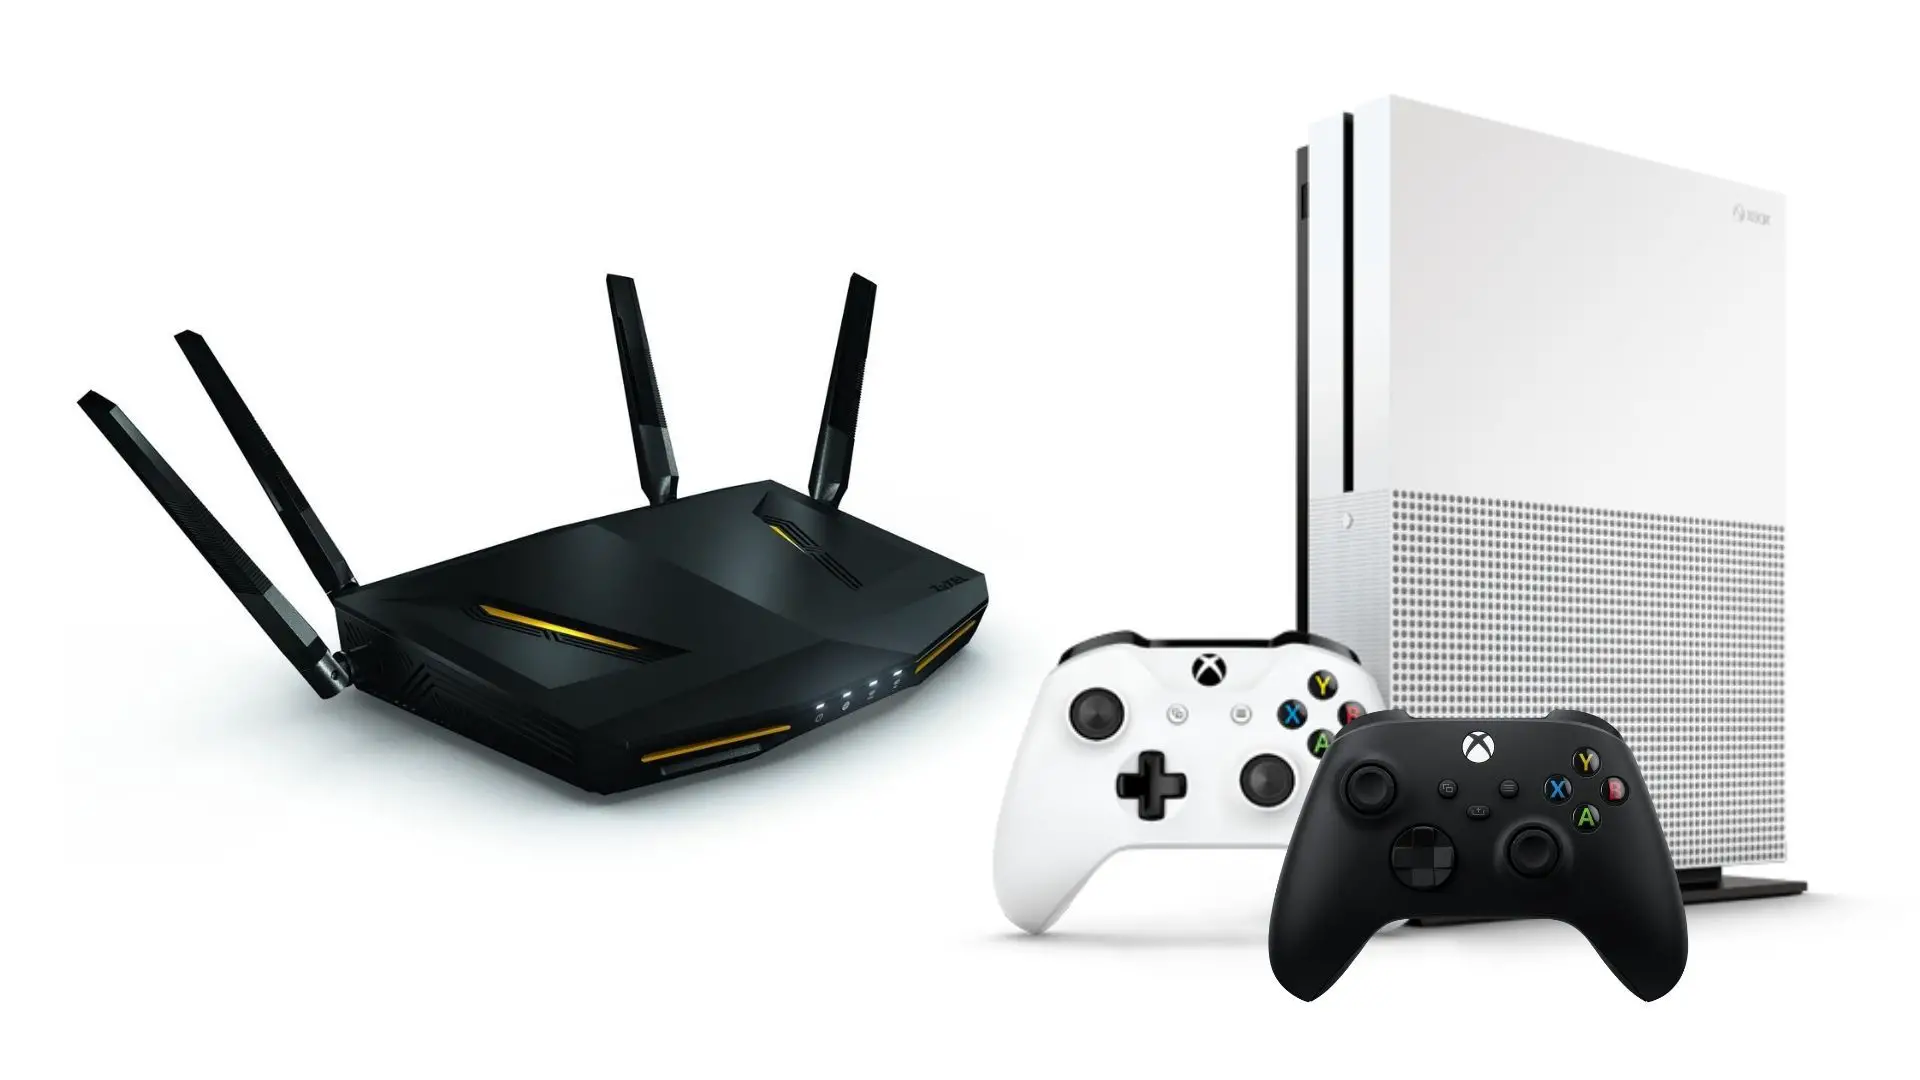 Best Gaming Routers for Xbox Series X in 2022 – Complete Buyer's Guide